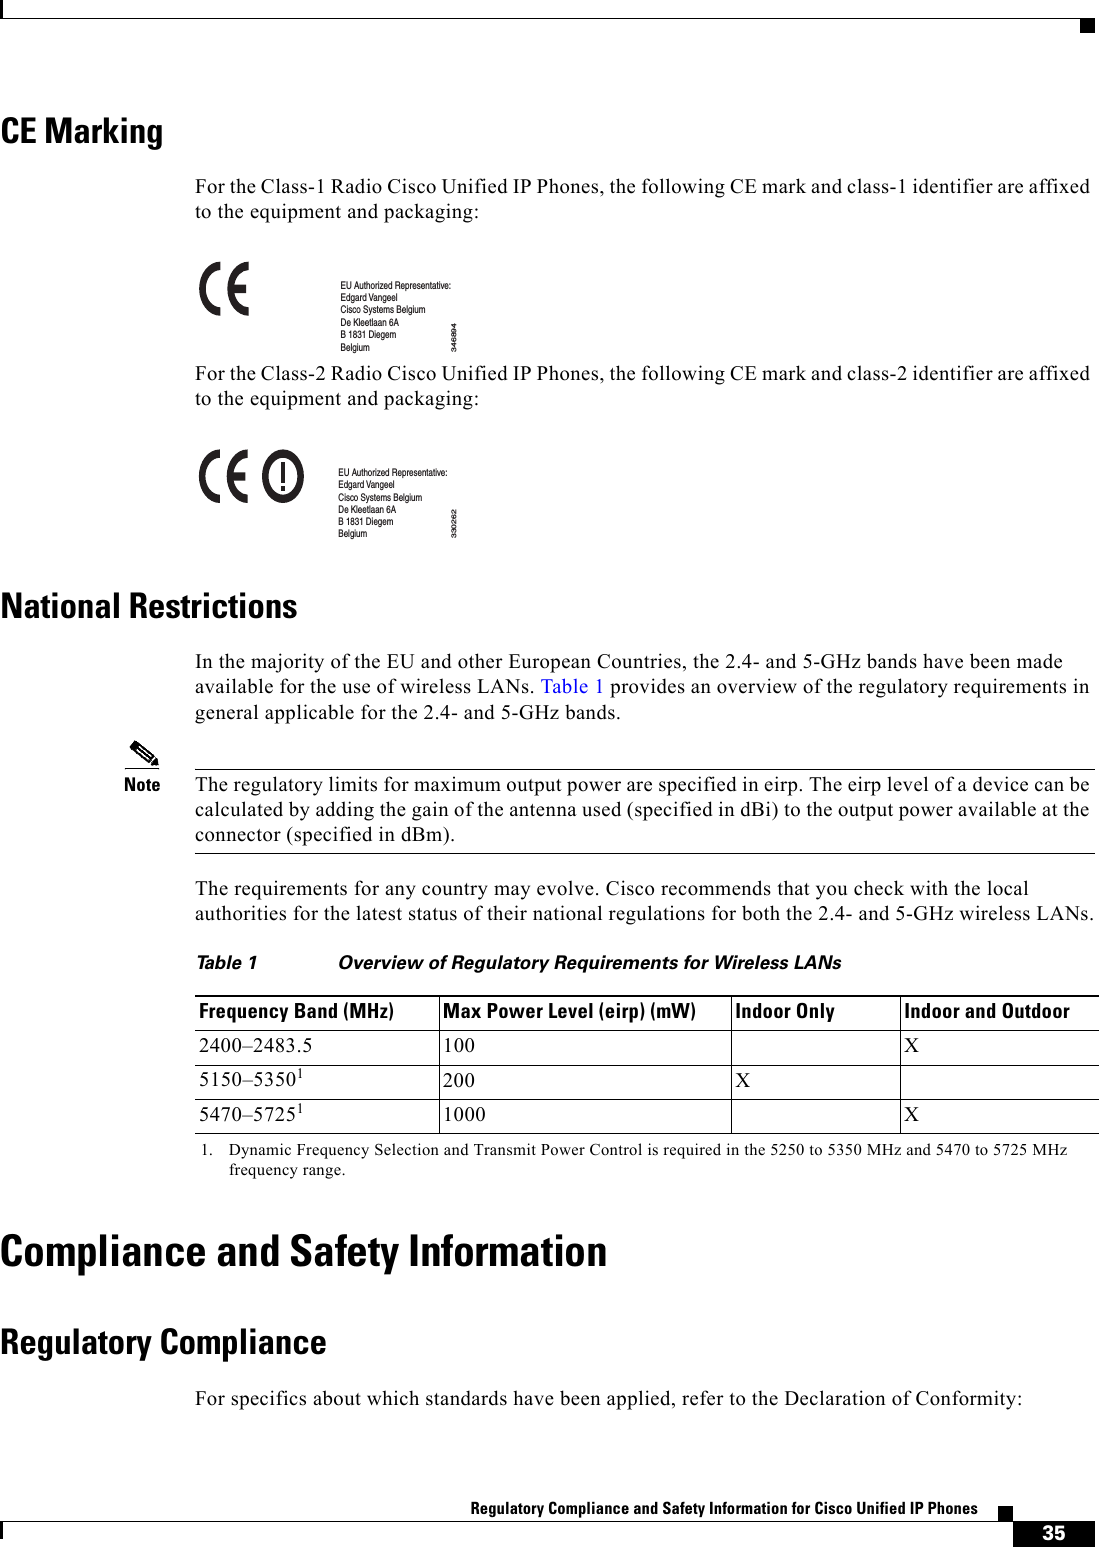  35Regulatory Compliance and Safety Information for Cisco Unified IP Phones CE MarkingFor the Class-1 Radio Cisco Unified IP Phones, the following CE mark and class-1 identifier are affixed to the equipment and packaging:For the Class-2 Radio Cisco Unified IP Phones, the following CE mark and class-2 identifier are affixed to the equipment and packaging:National RestrictionsIn the majority of the EU and other European Countries, the 2.4- and 5-GHz bands have been made available for the use of wireless LANs. Table 1 provides an overview of the regulatory requirements in general applicable for the 2.4- and 5-GHz bands.Note The regulatory limits for maximum output power are specified in eirp. The eirp level of a device can be calculated by adding the gain of the antenna used (specified in dBi) to the output power available at the connector (specified in dBm).The requirements for any country may evolve. Cisco recommends that you check with the local authorities for the latest status of their national regulations for both the 2.4- and 5-GHz wireless LANs.Compliance and Safety InformationRegulatory ComplianceFor specifics about which standards have been applied, refer to the Declaration of Conformity:346894EU Authorized Representative:Edgard VangeelCisco Systems BelgiumDe Kleetlaan 6AB 1831 DiegemBelgium330262EU Authorized Representative:Edgard VangeelCisco Systems BelgiumDe Kleetlaan 6AB 1831 DiegemBelgiumTable 1 Overview of Regulatory Requirements for Wireless LANsFrequency Band (MHz) Max Power Level (eirp) (mW) Indoor Only Indoor and Outdoor2400–2483.5 100 X5150–535011. Dynamic Frequency Selection and Transmit Power Control is required in the 5250 to 5350 MHz and 5470 to 5725 MHz frequency range.200 X5470–572511000 X